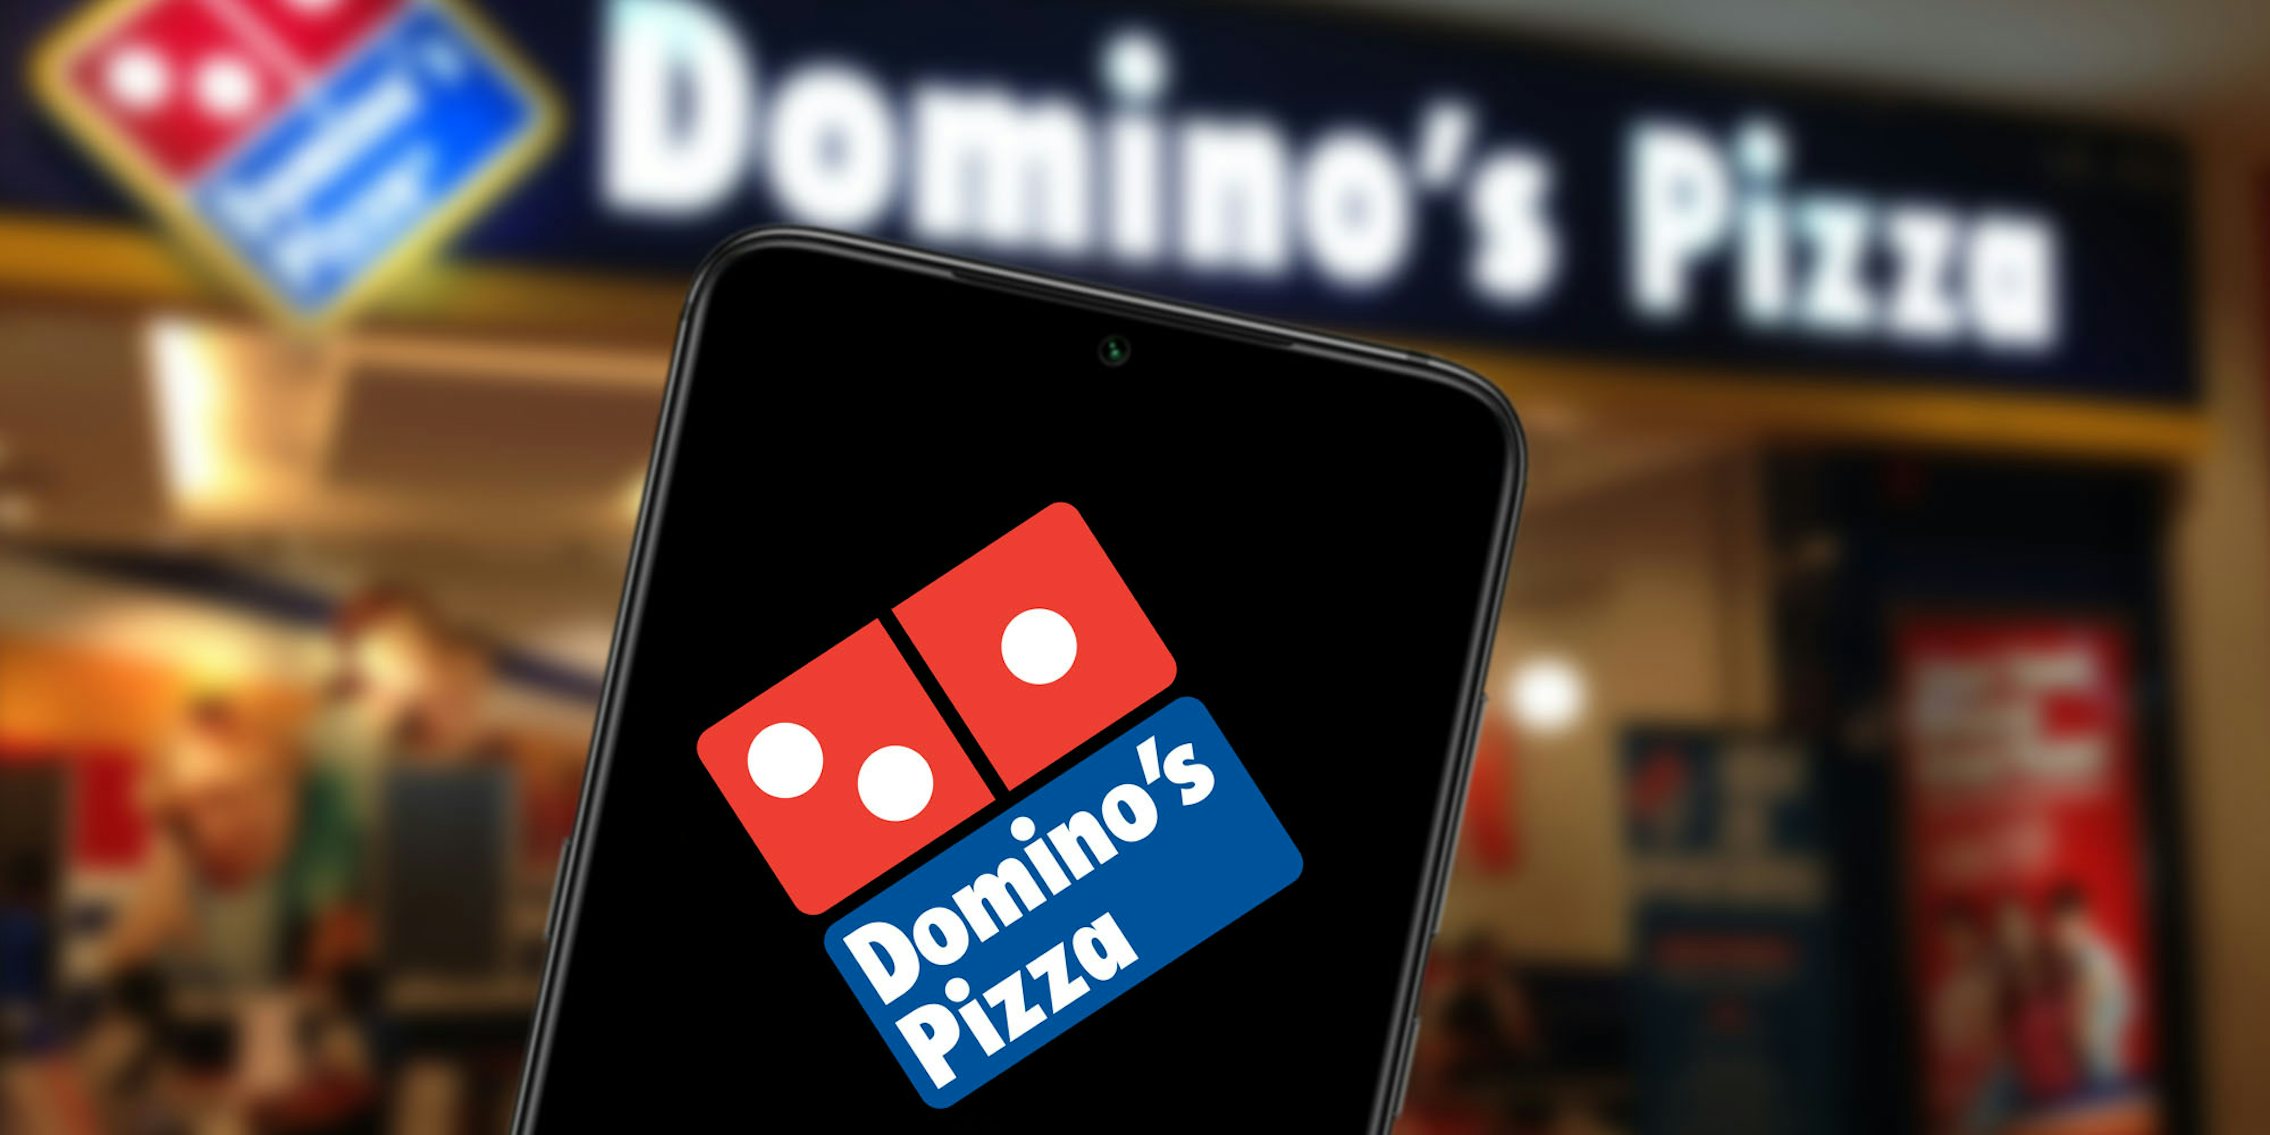 Domino's Pizza shop blurred in background phone in foreground with domino's logo on screen